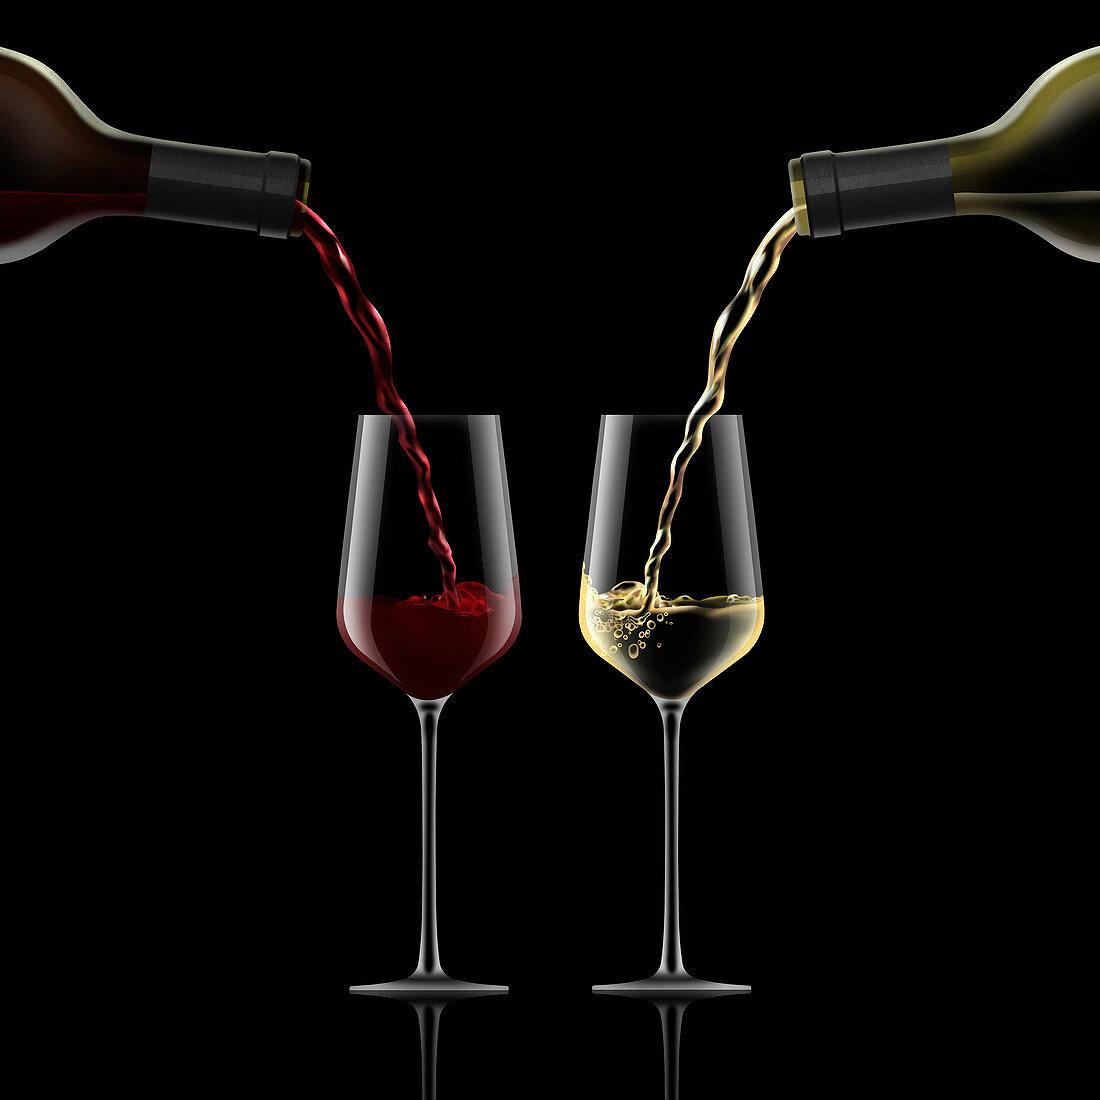 Red and white wine being poured, illustration